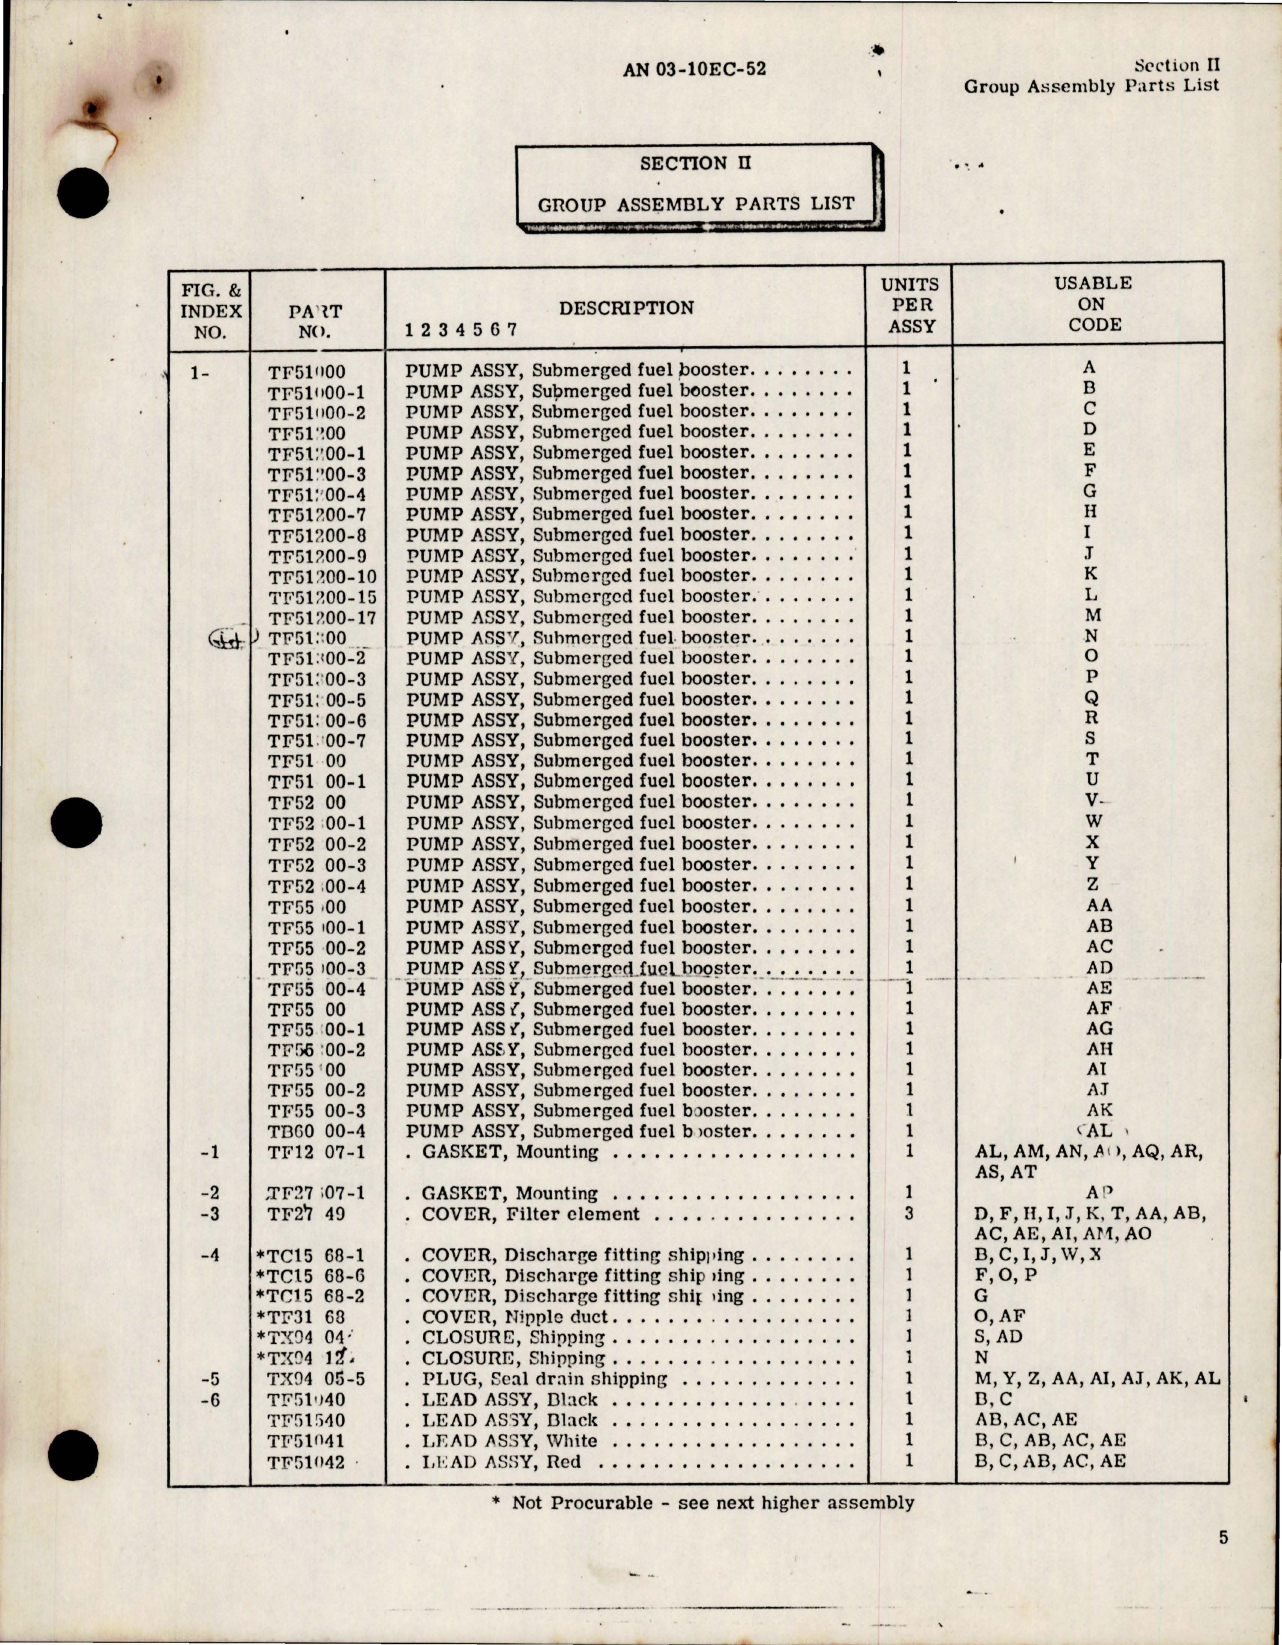 Sample page 7 from AirCorps Library document: Illustrated Parts Breakdown for Submerged Fuel Booster Pumps 